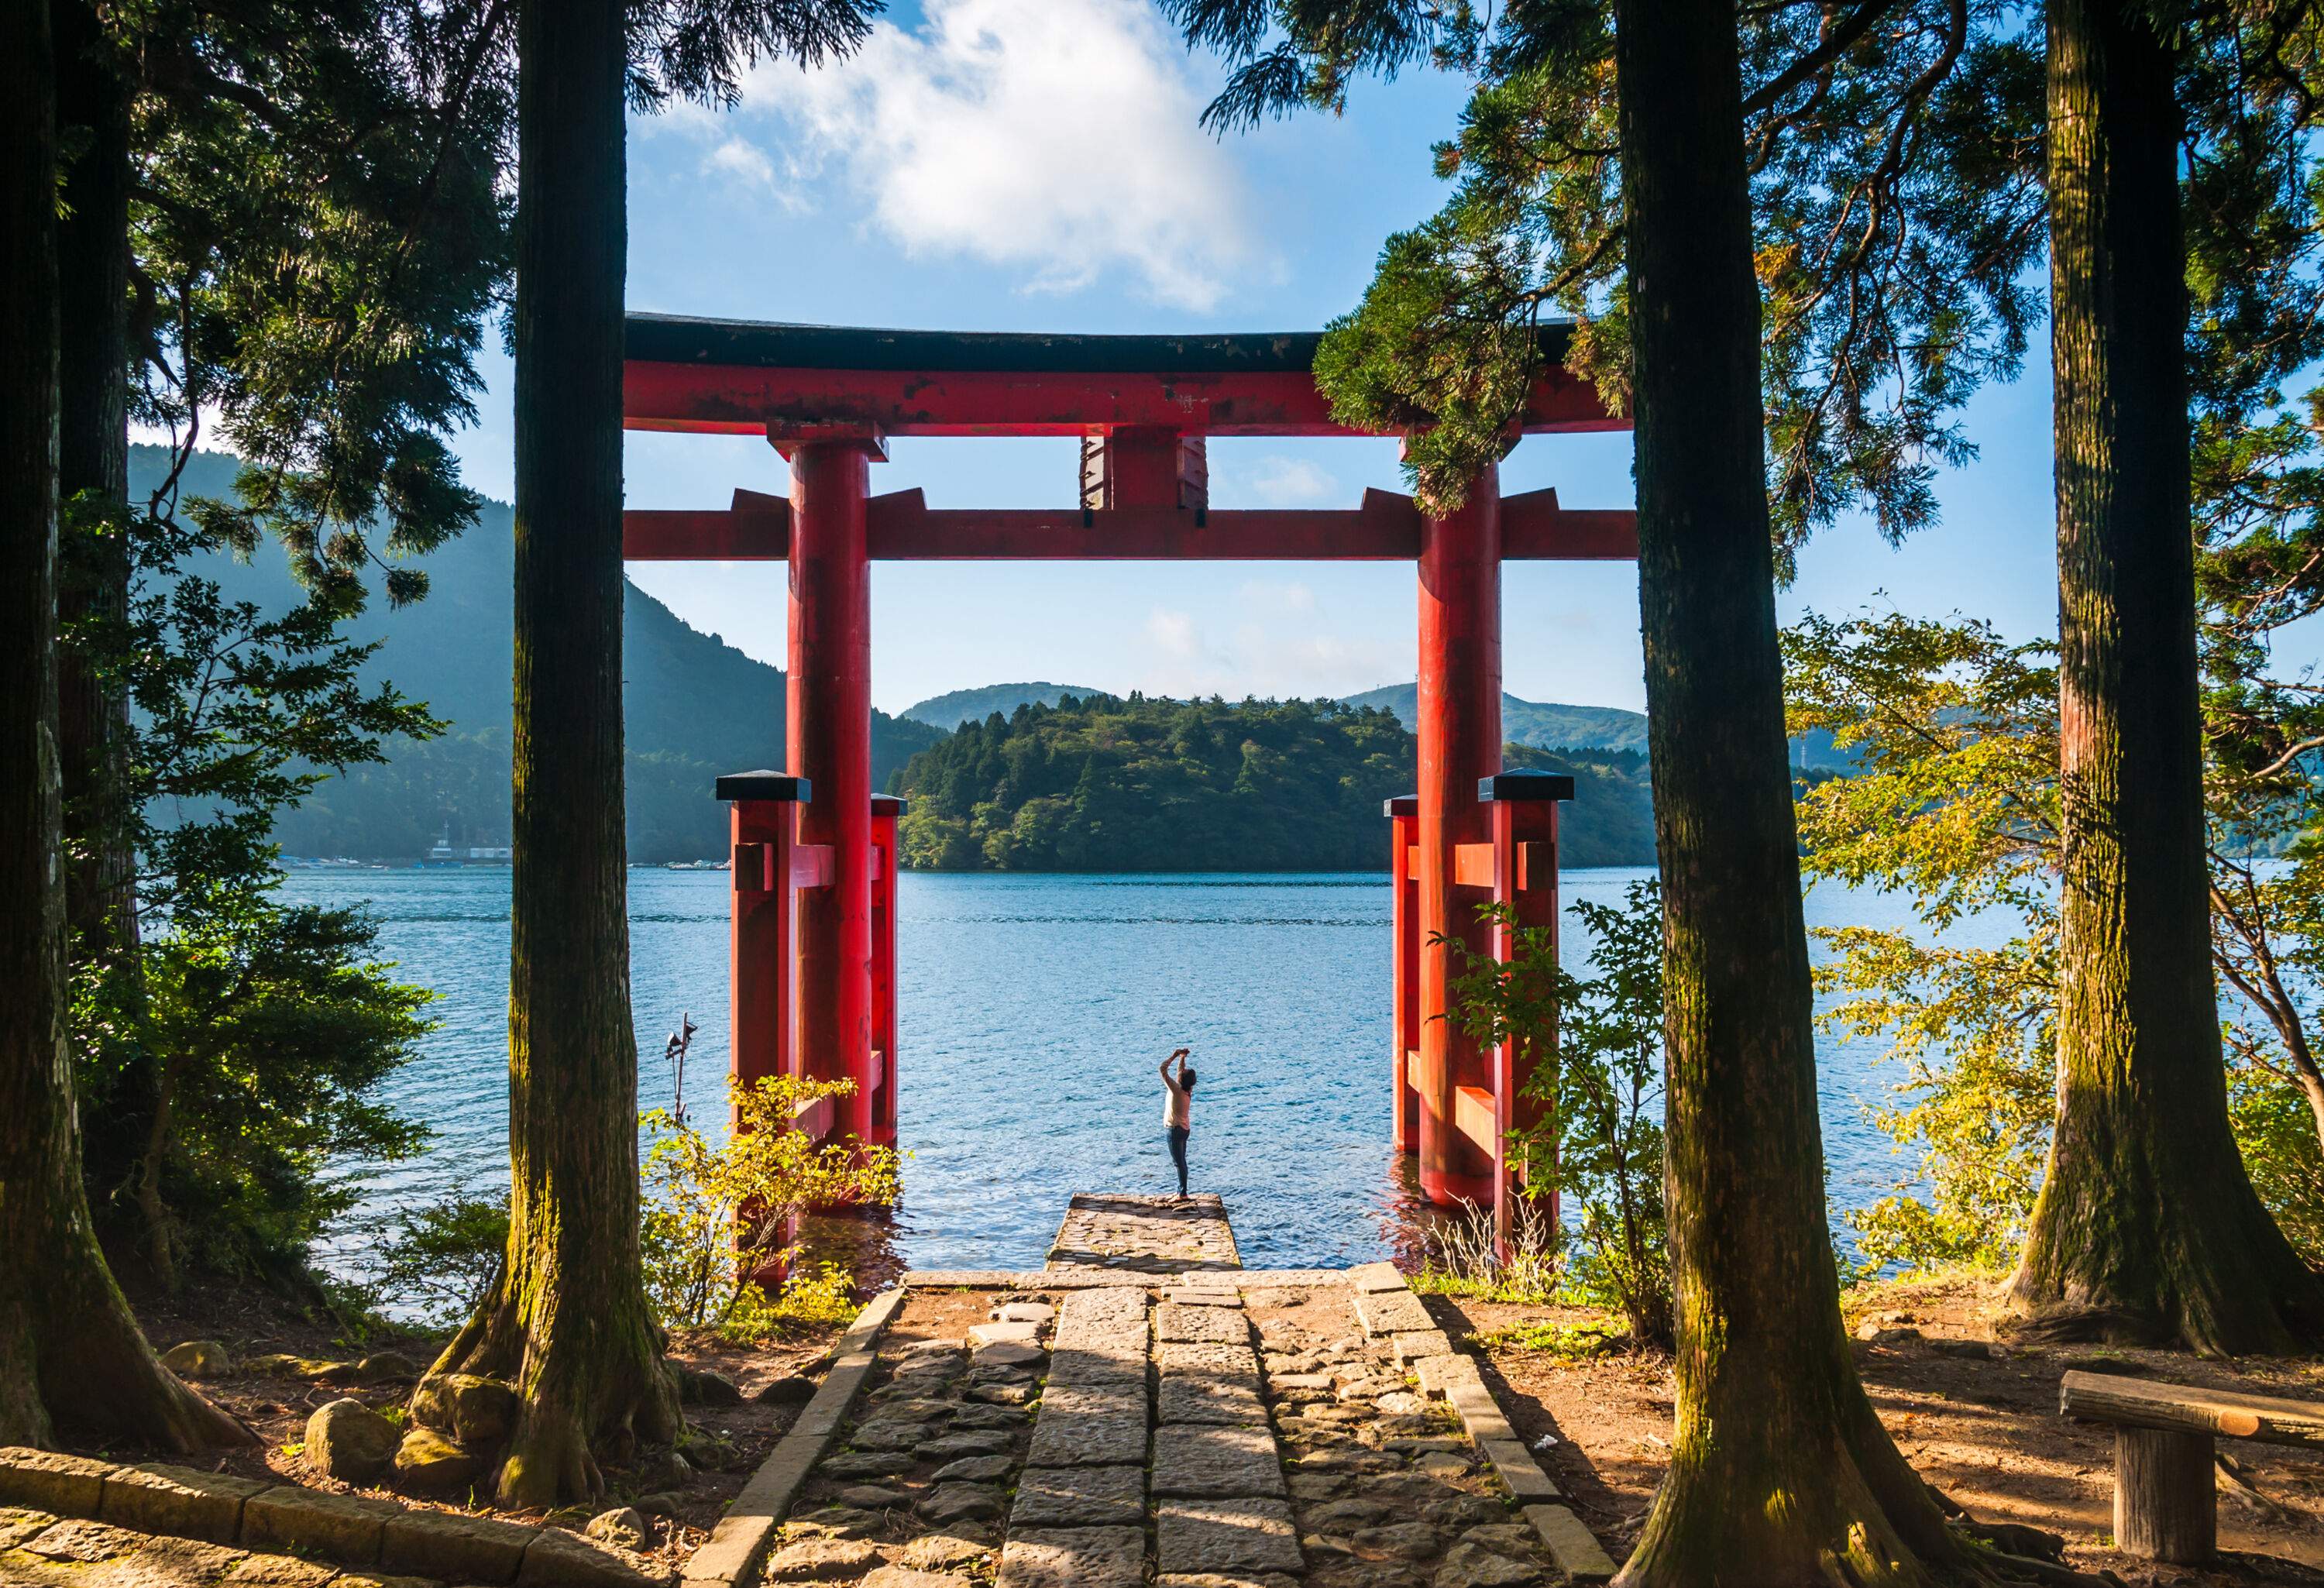 A young woman captures the beauty of a torii gate nestled among majestic trees against the backdrop of a tranquil lake through her phone's lens.